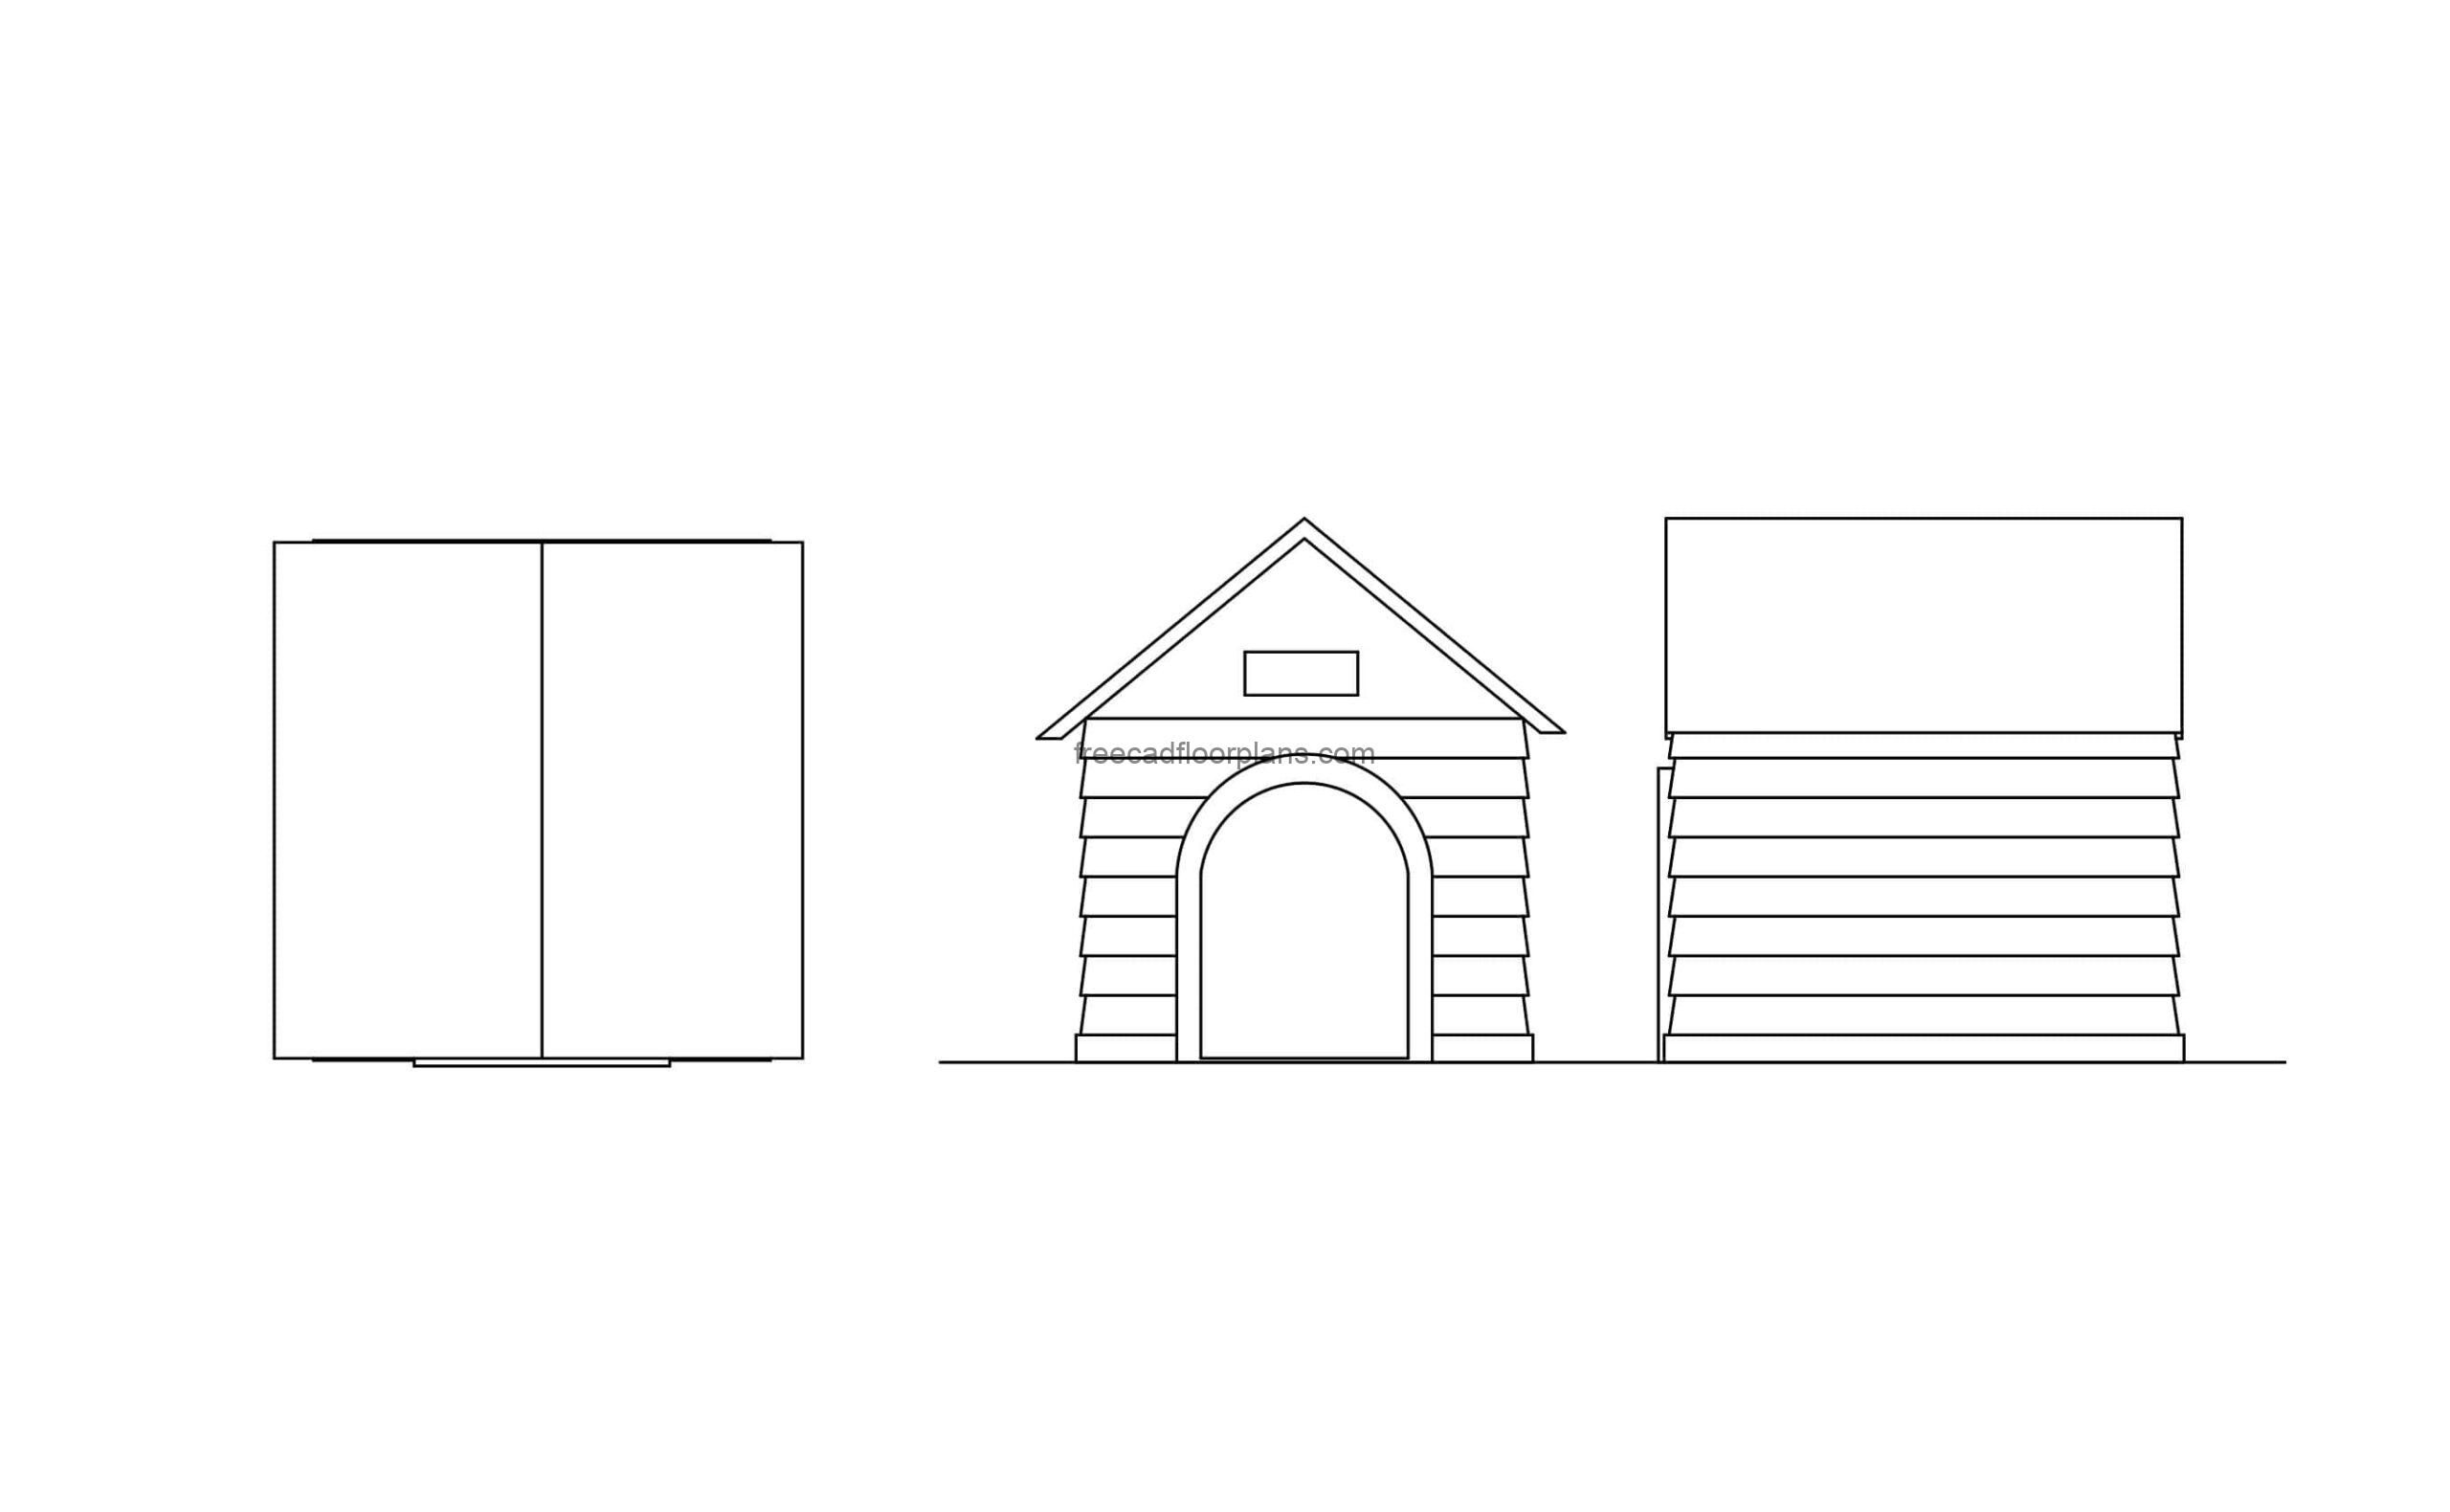 dog house drawign elevantion and plan views cad block for free download